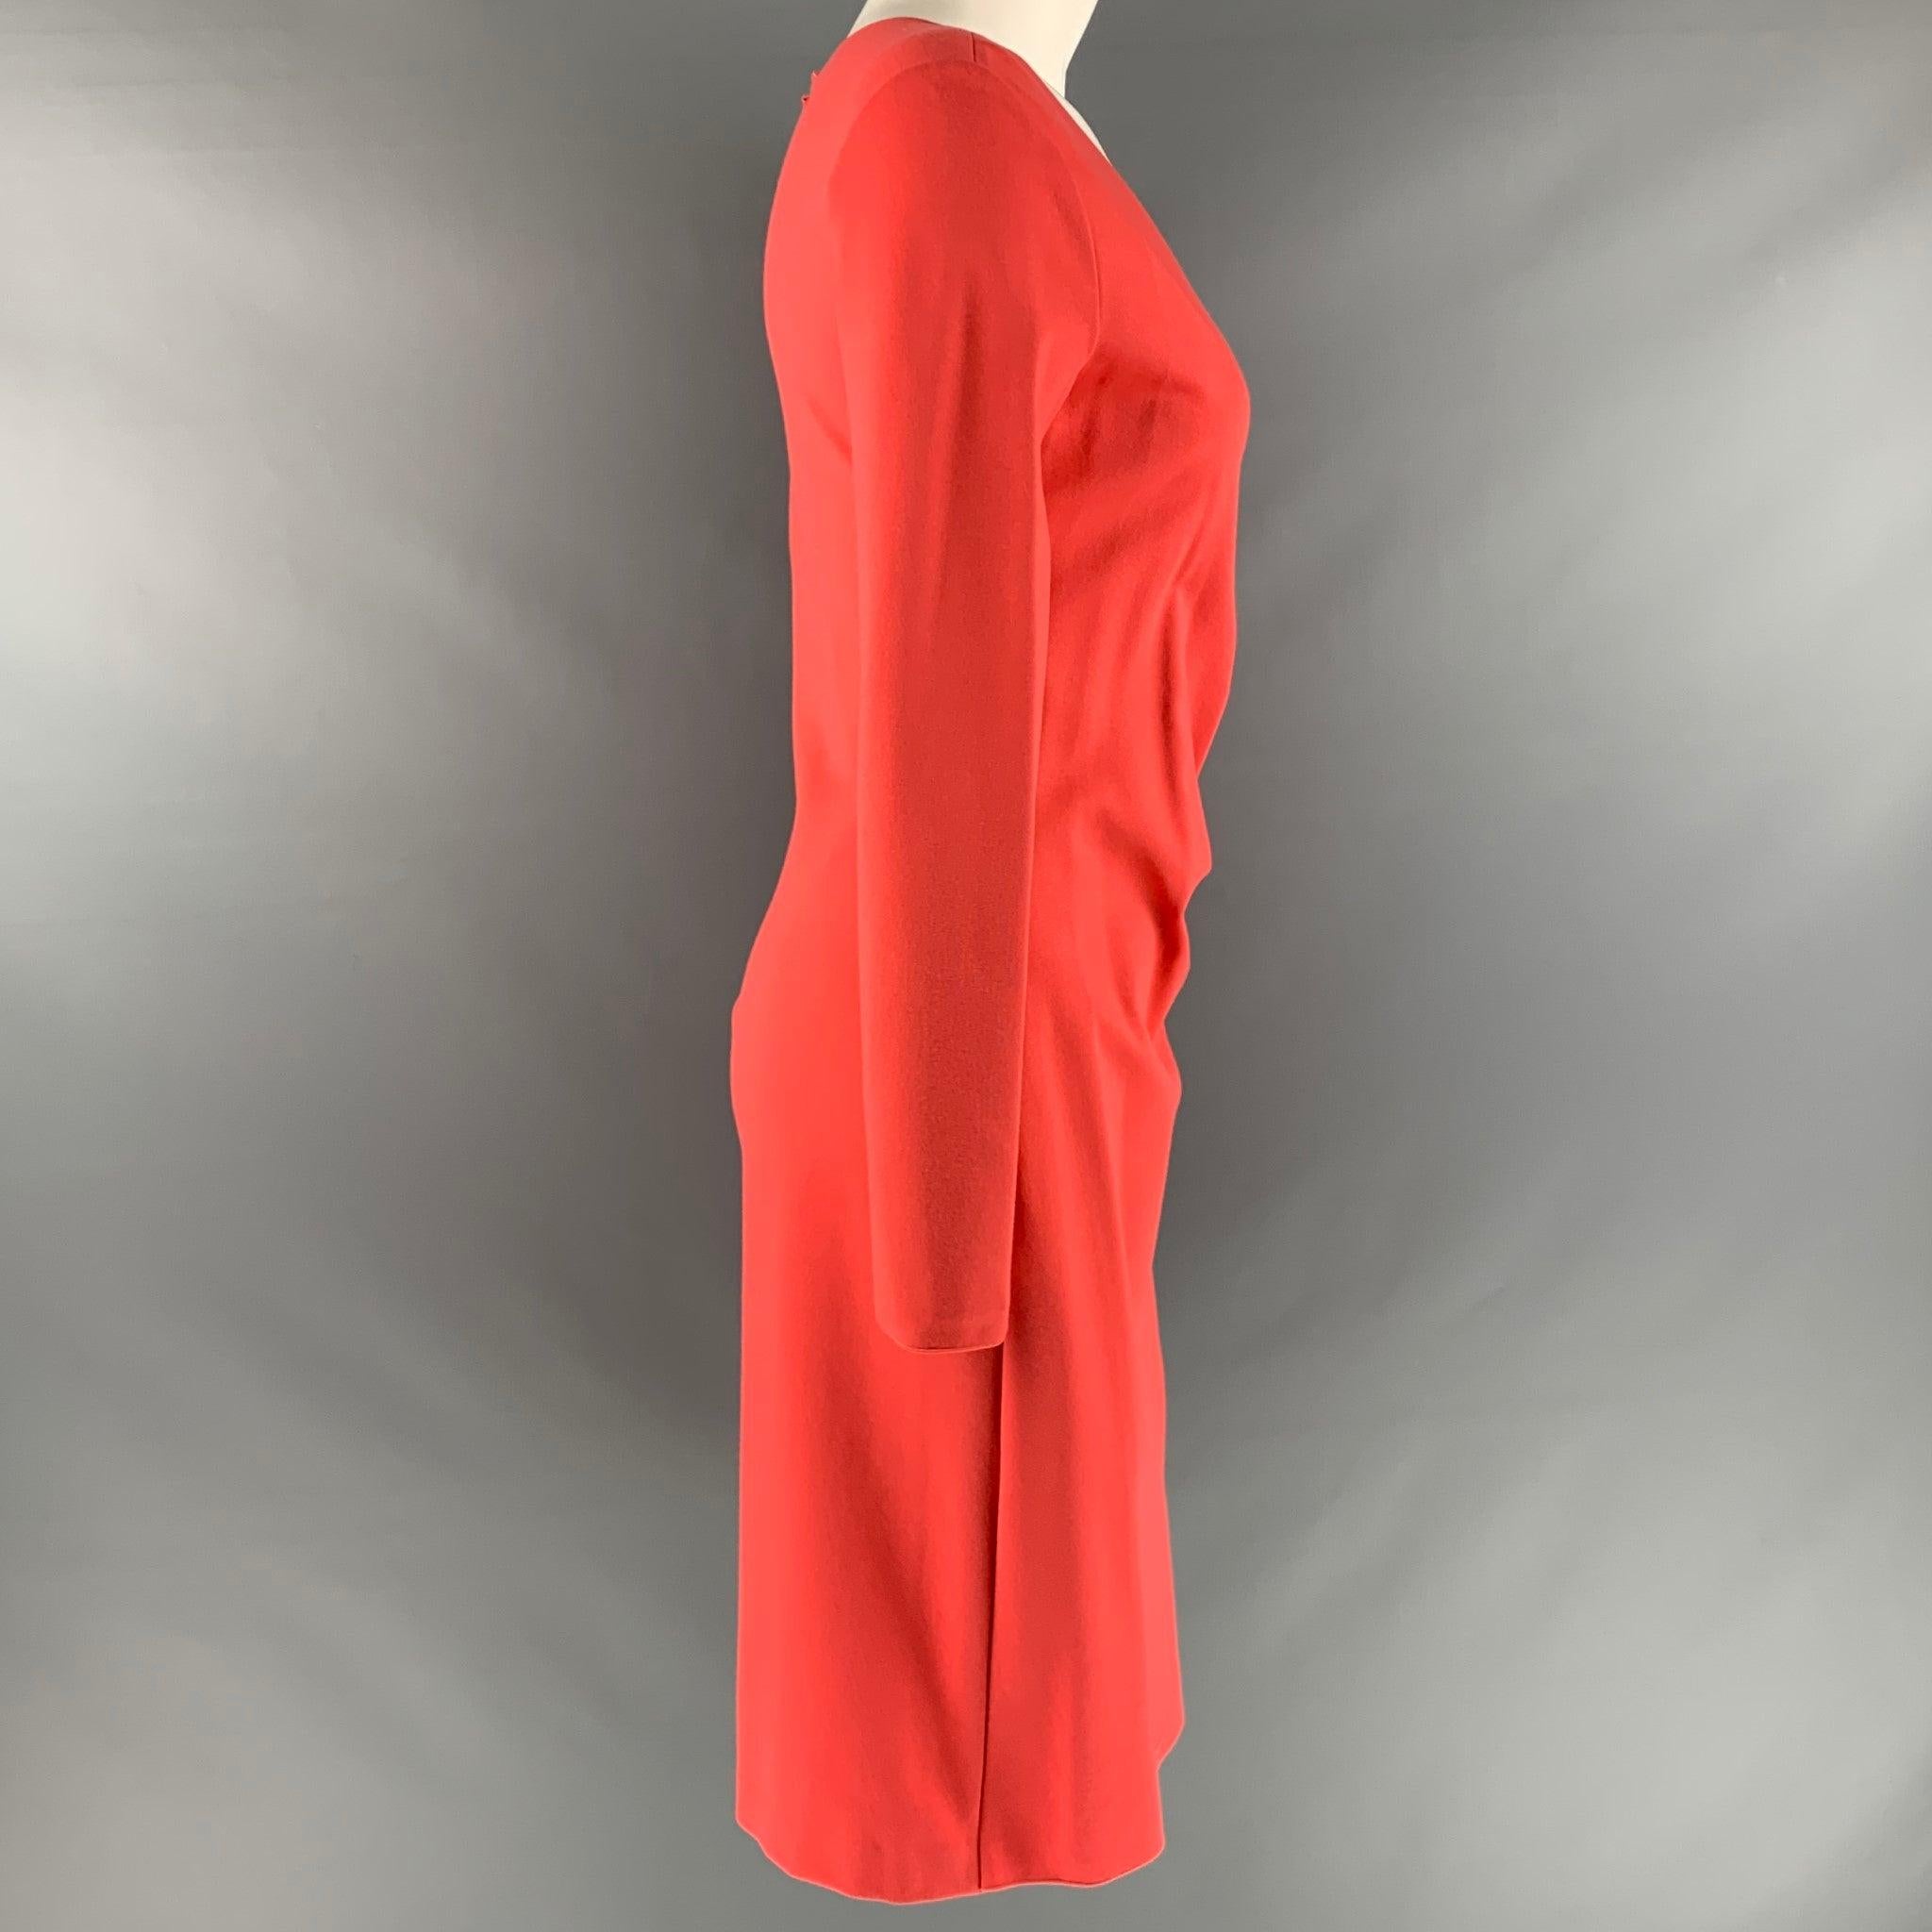 EMPORIO ARMANI
dress in an orange viscose blend fabric featuring a faux wrap style, V-neck, long sleeves, and below knee length.Very Good Pre-Owned Condition. Minor signs of wear. 

Marked:  42 

Measurements: 
 
Shoulder: 16.5 inches Sleeve: 23